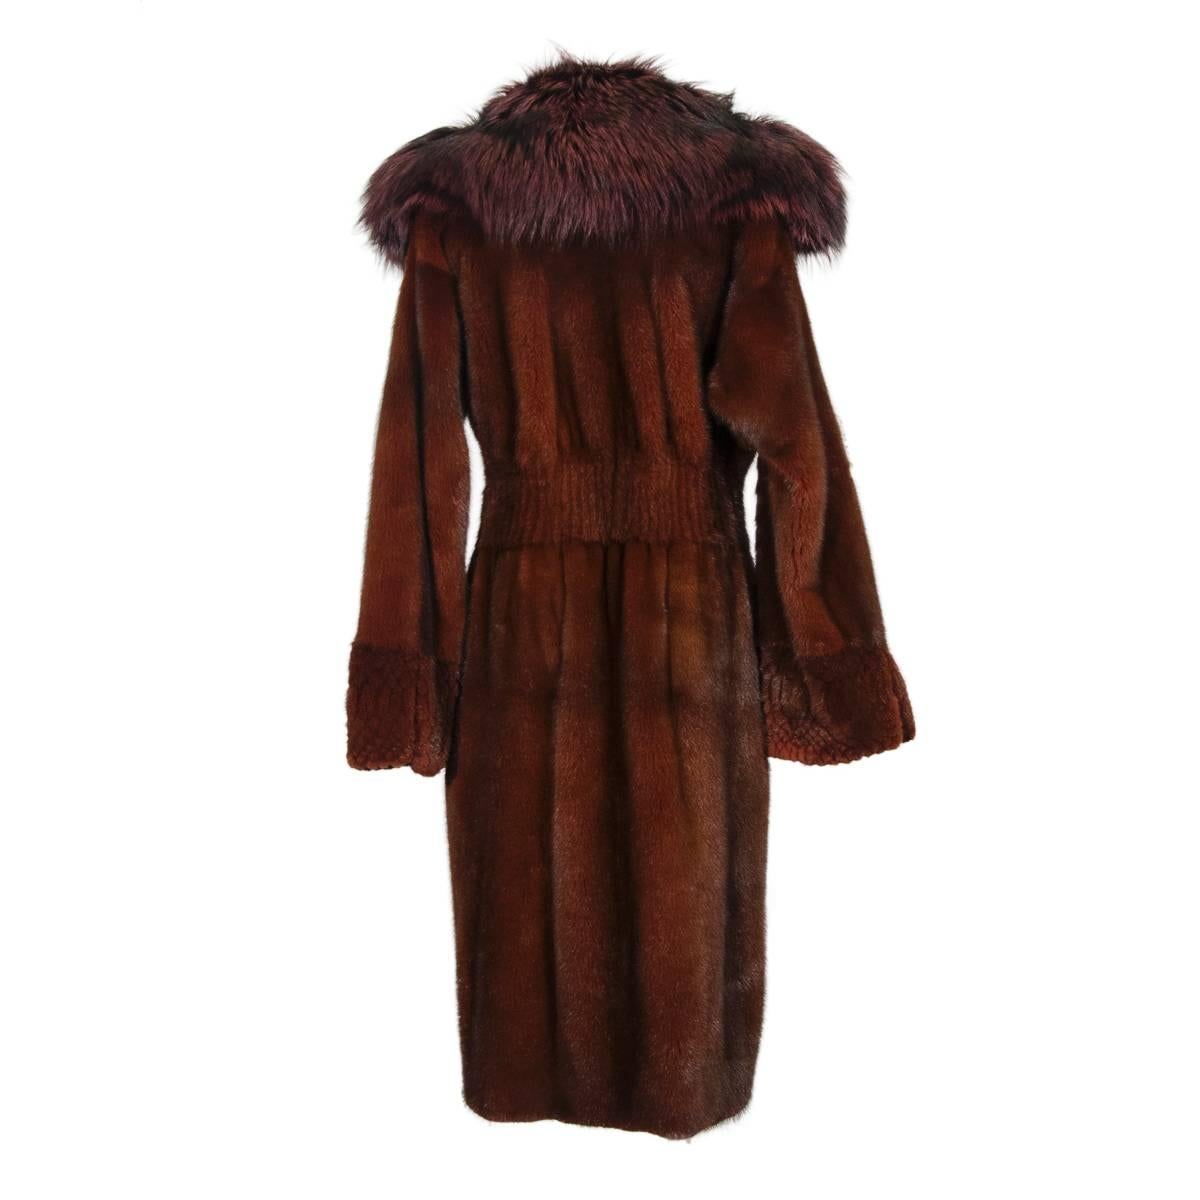 Fantastic and prestigious fur coat by Yves Saint Laurent Rive Gauche Paris
Real mink fur
The mink is plain overall and perfectly worked on wrists, profiles and belt level
Rust color with shades
The coat presents also a wonderful fox fur